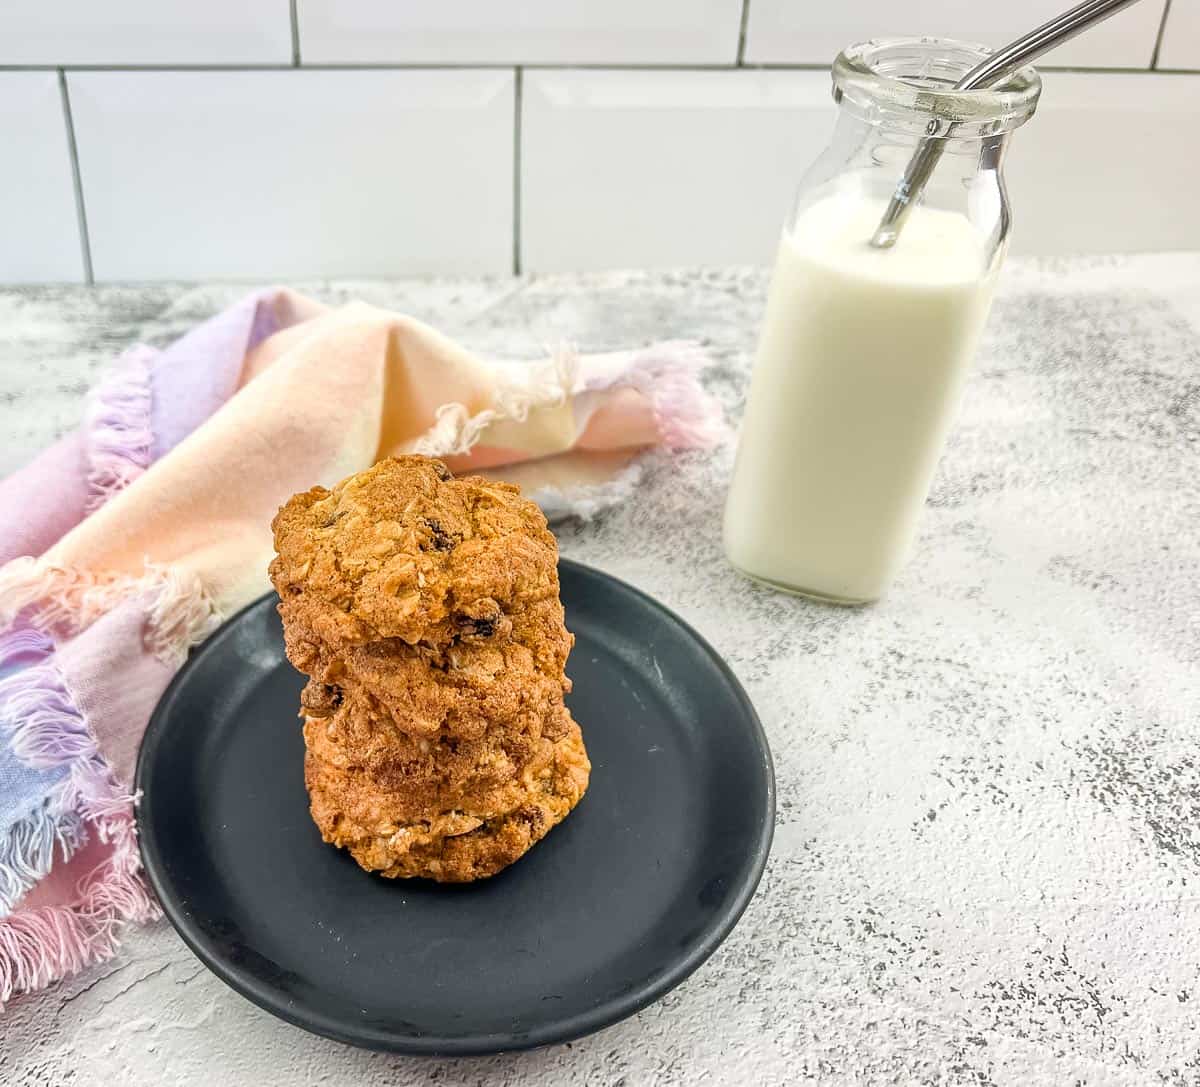 Oatmeal raisin cookies on a plate next to a glass of milk.